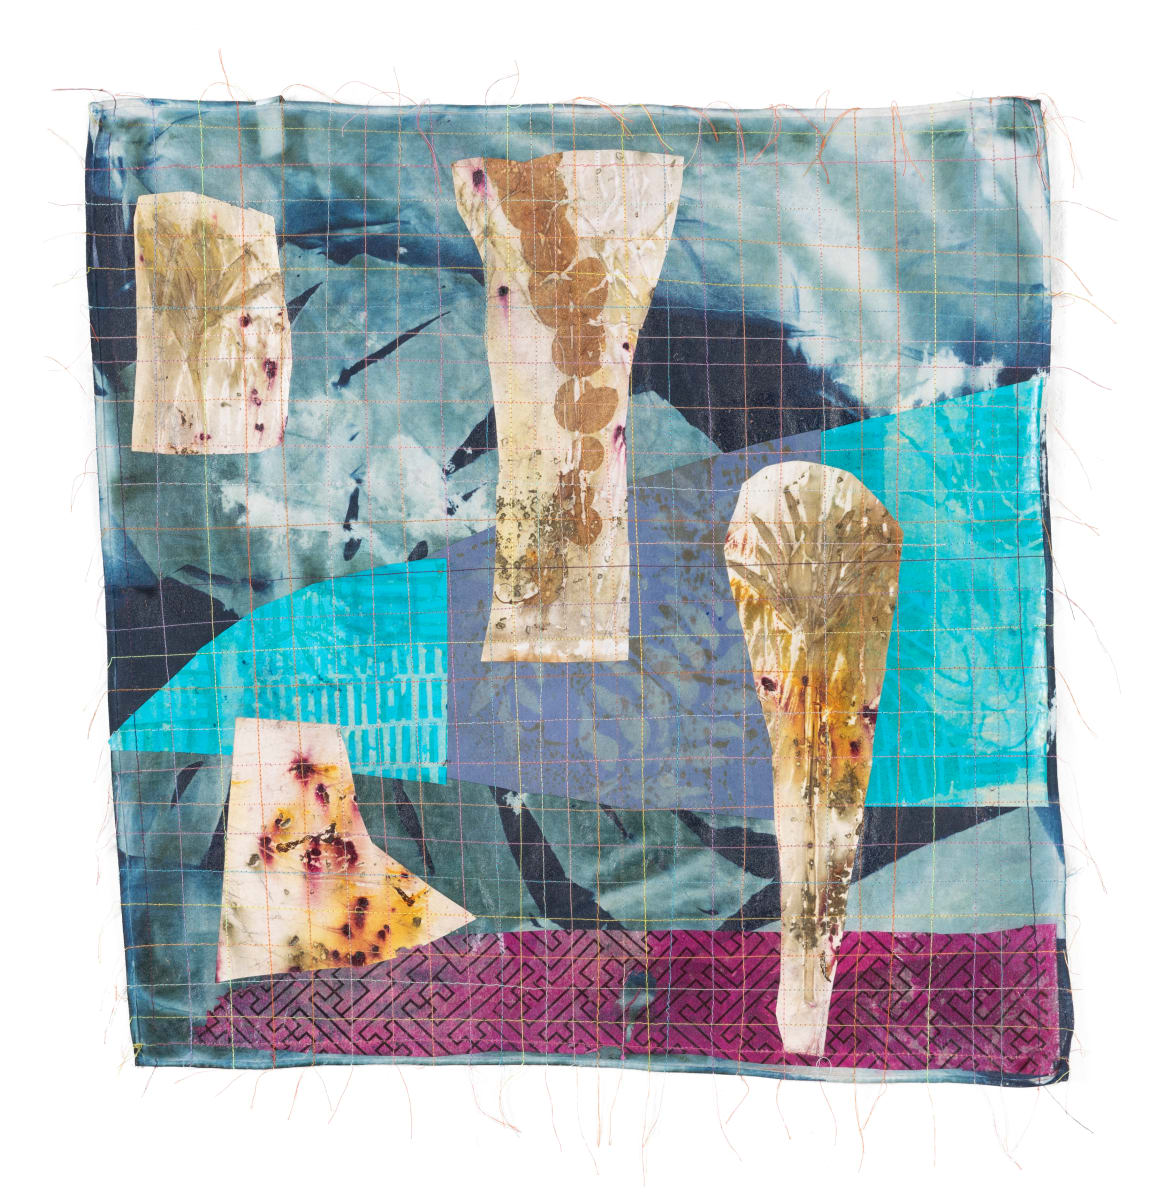 Abstract Cloth Collage 10 by Hollie Heller 